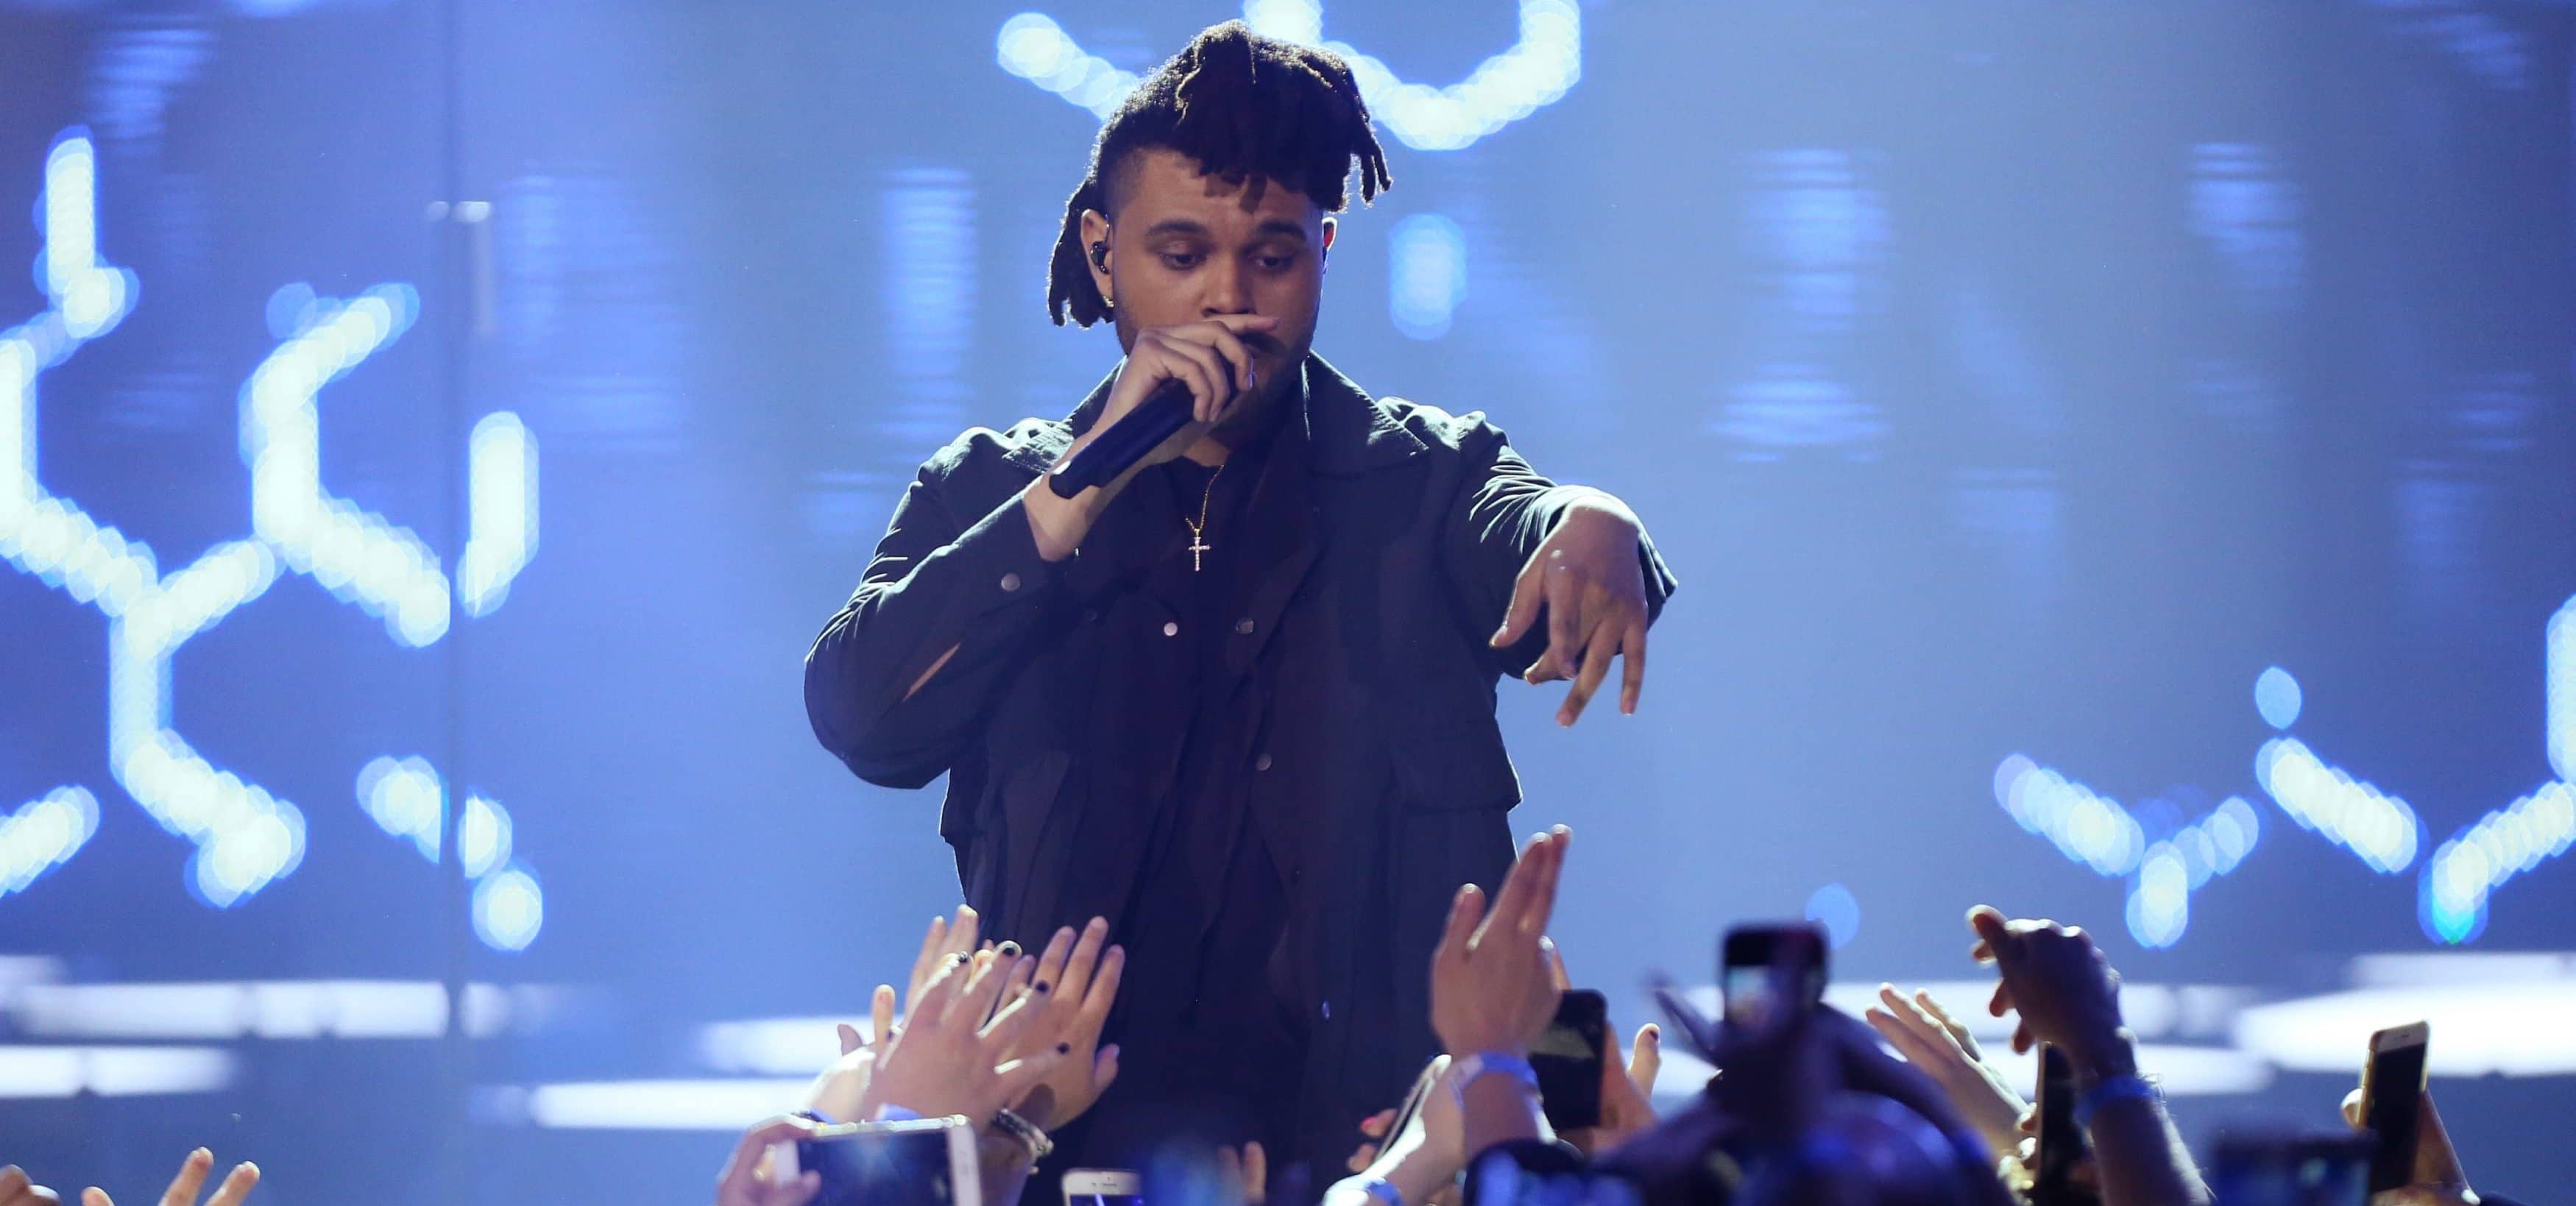 the-weeknd-performs-on-stage-at-the-2016-juno-awards-in-calgary